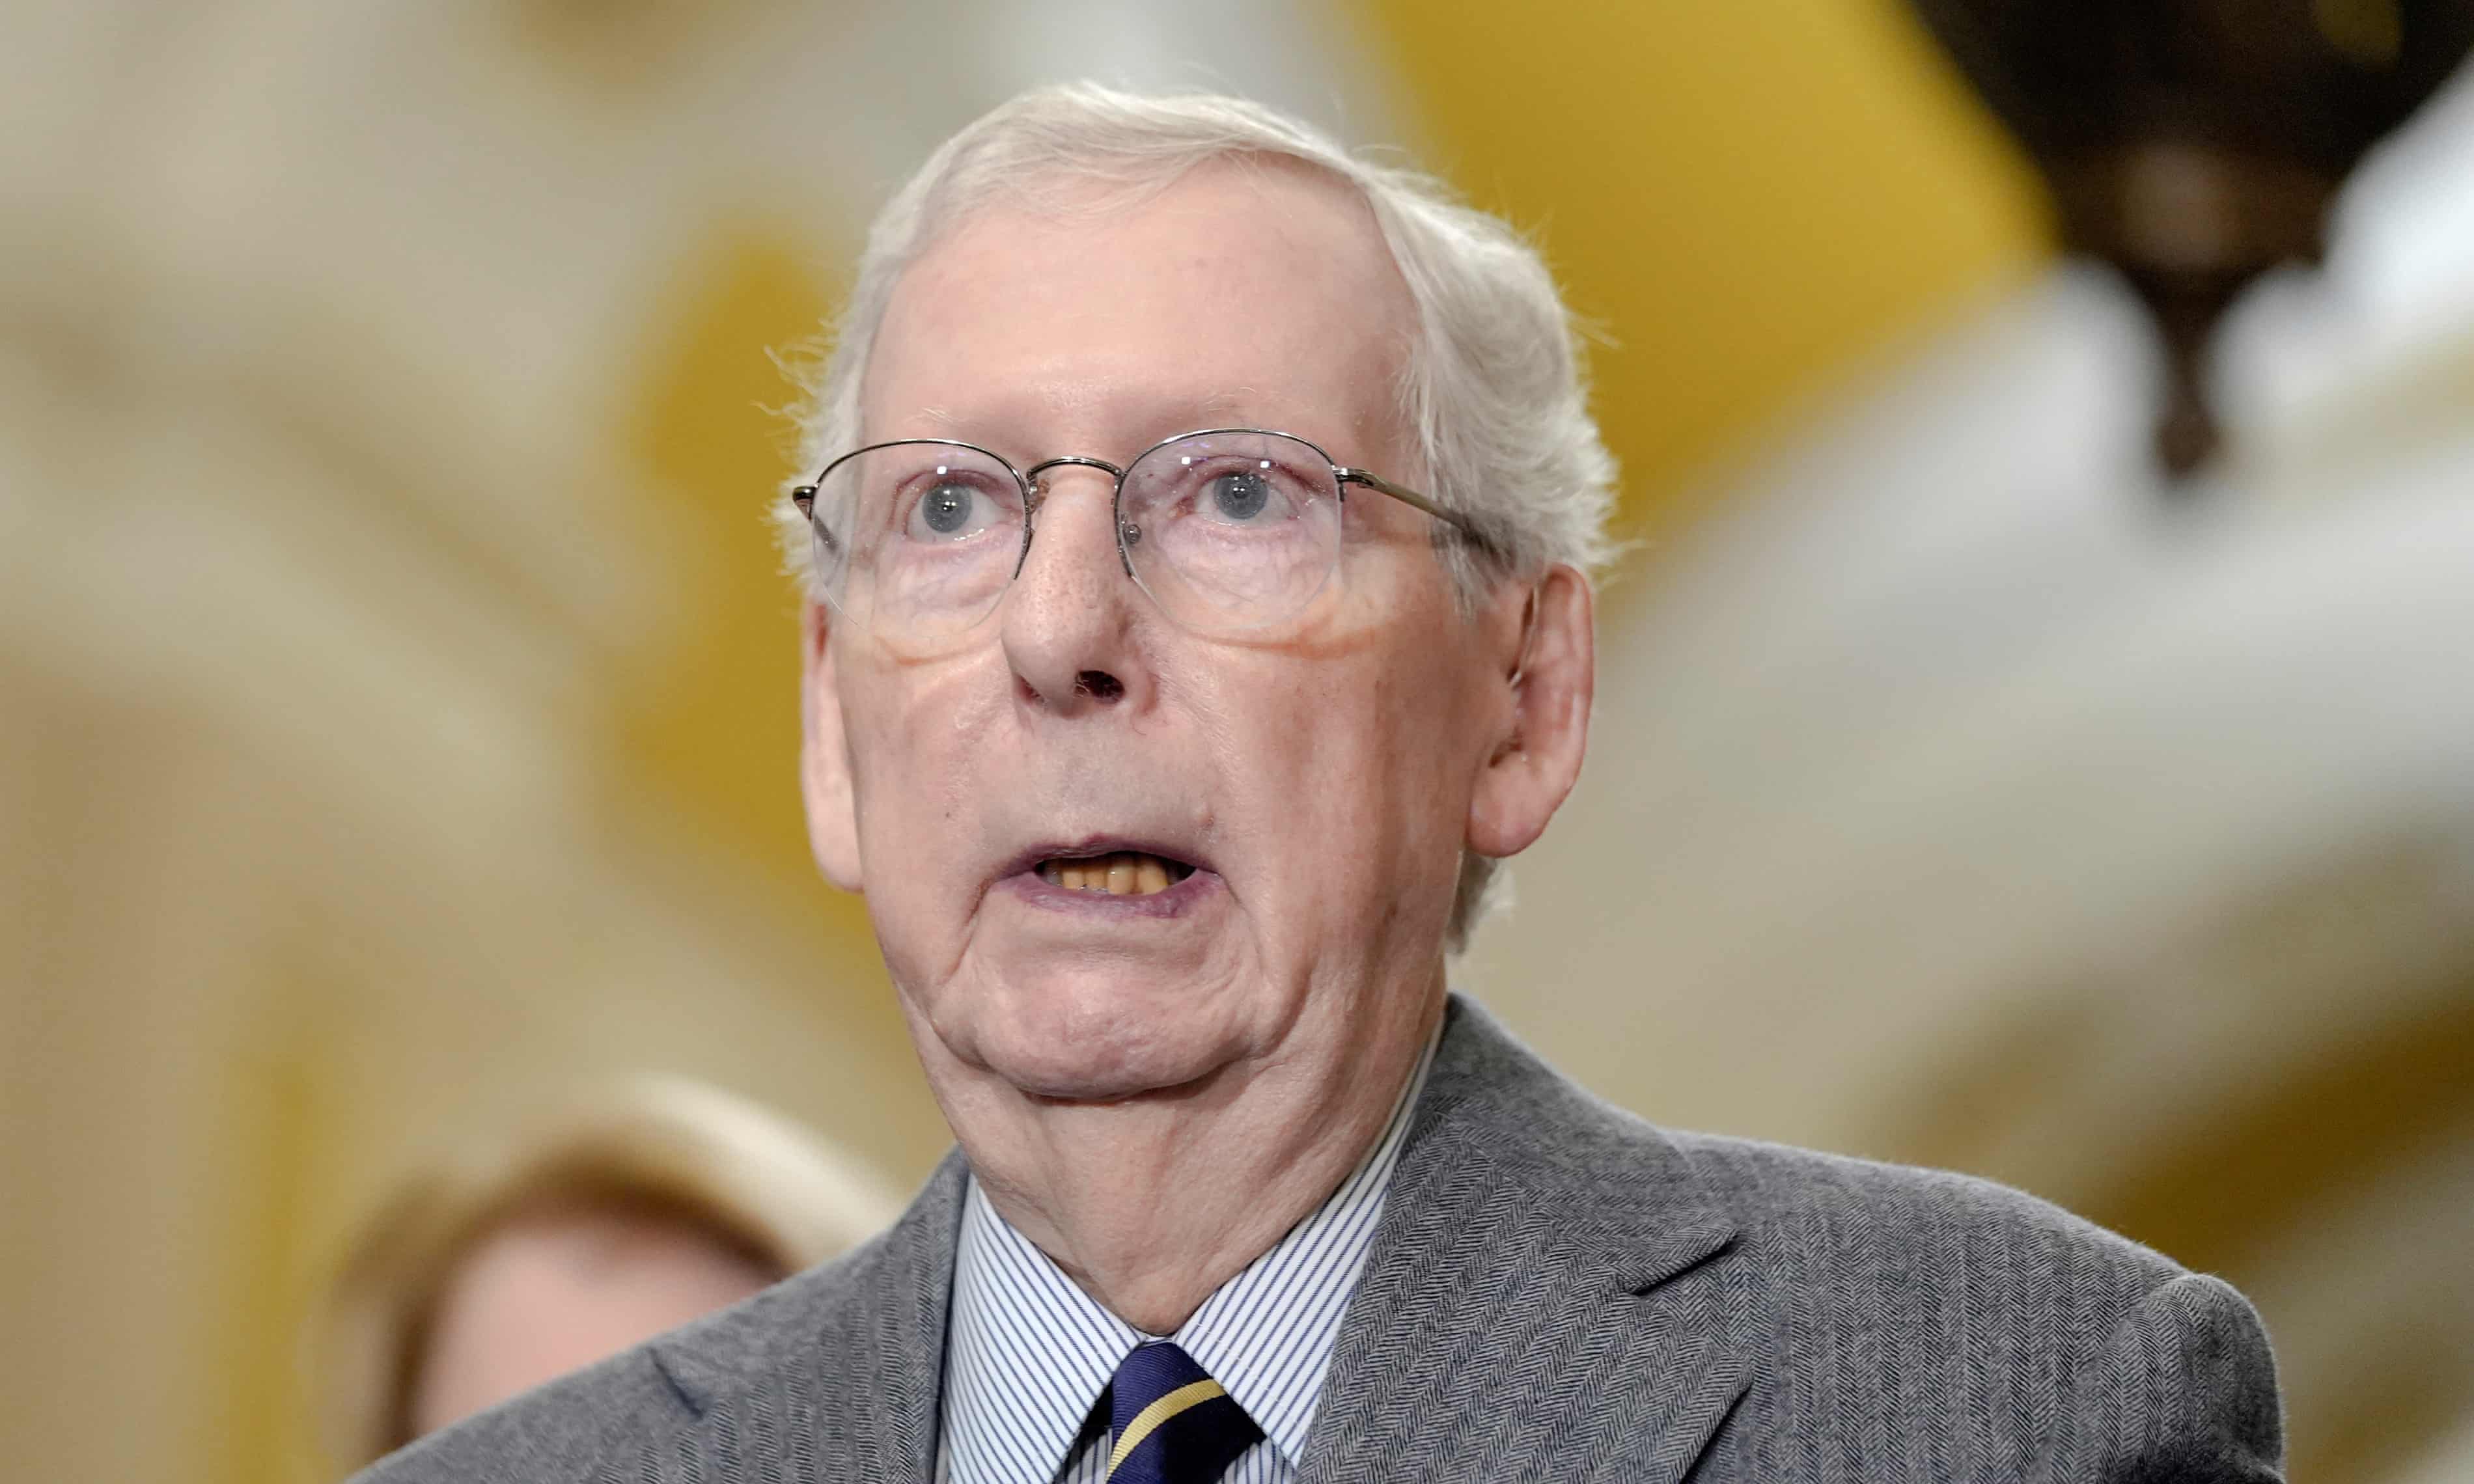 Few truly loathe Trump more than Mitch McConnell, but he’s been his top enabler (theguardian.com)